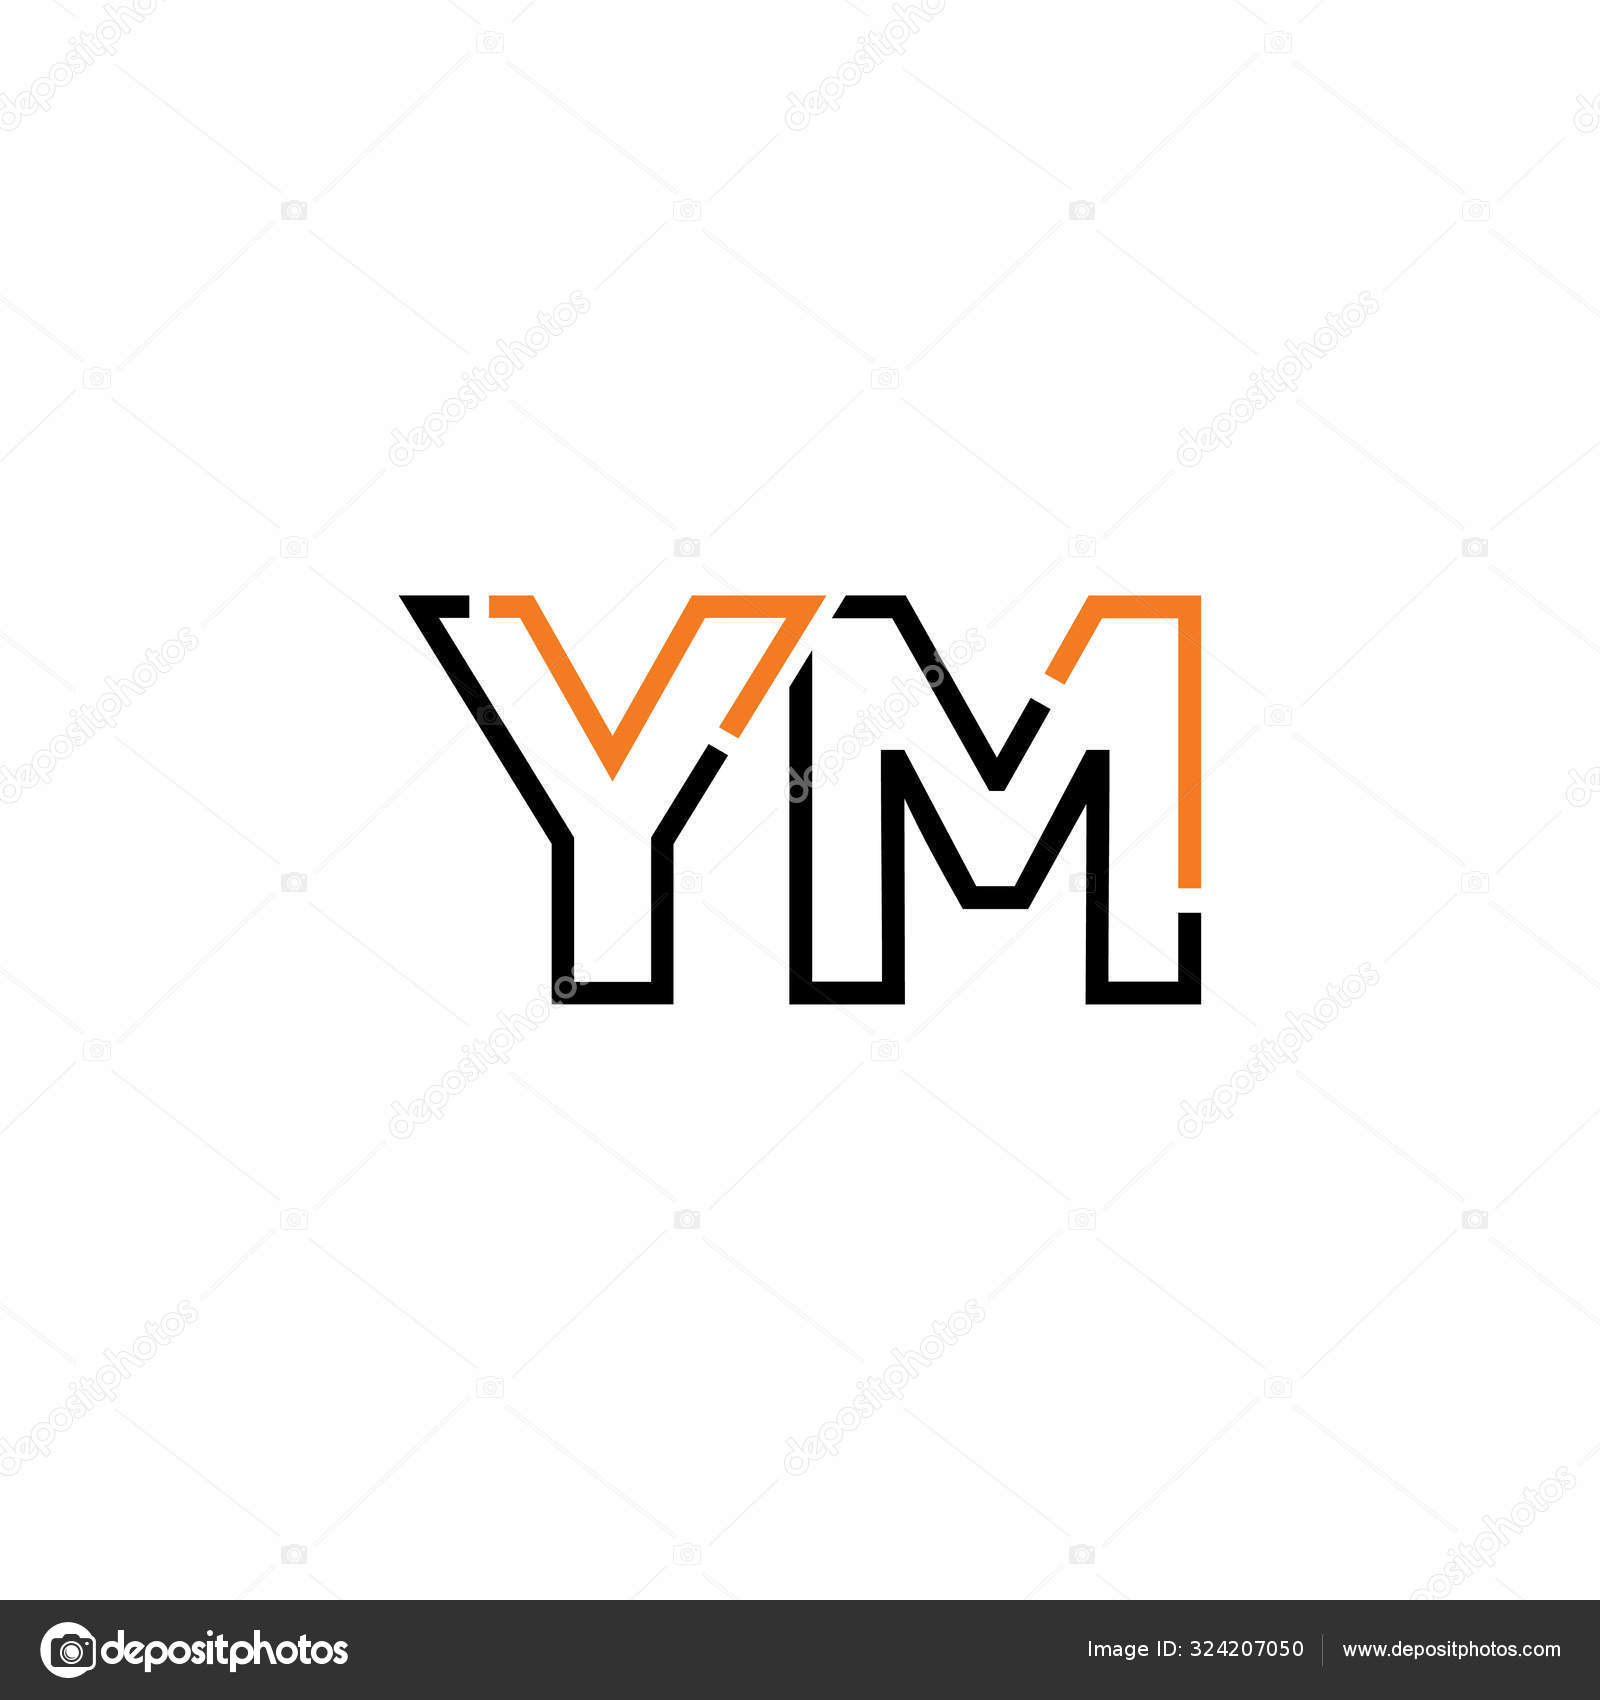 ᐈ Ym Letter Logo Stock Images Royalty Free Letters Ym Vectors Download On Depositphotos